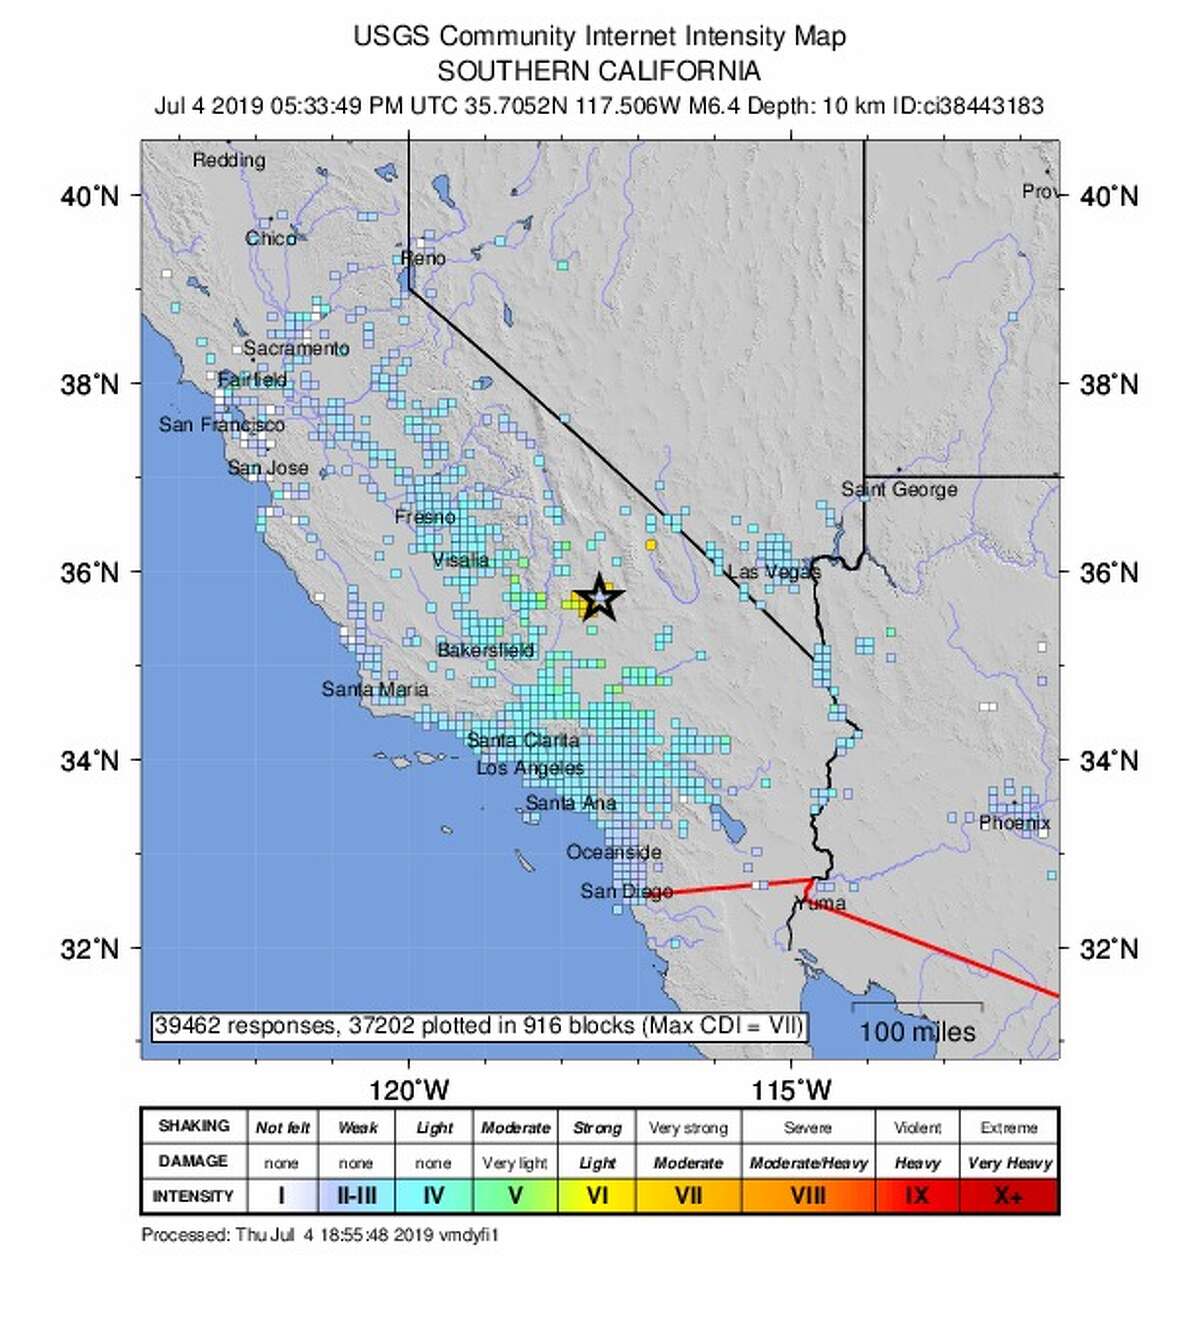 This image shows that there were people who reported to the United States Geological Survey that they felt the 6.4-magnitude earthquake in the San Francisco Bay Area as well as throughout the state of California.